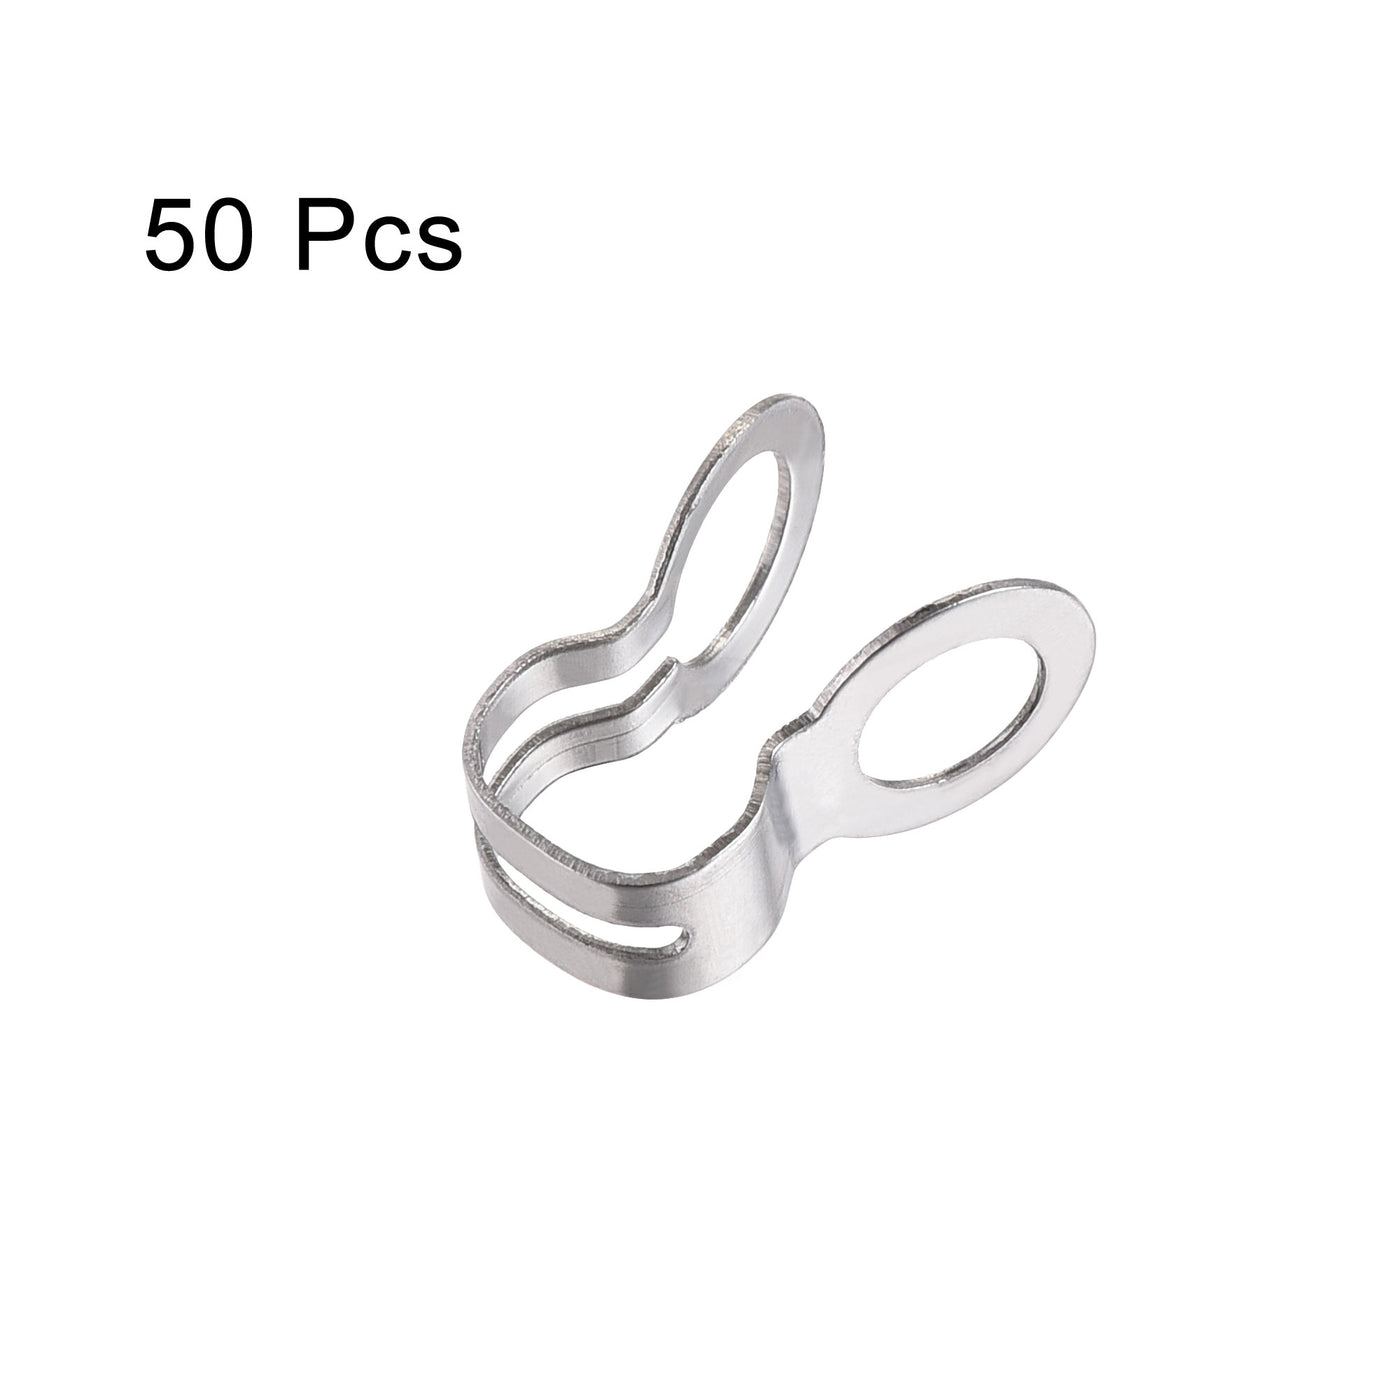 Uxcell Uxcell Ball Chain Connector, 6mm Double Ring Style Link Stainless Steel Loop Connection, Pack of 50